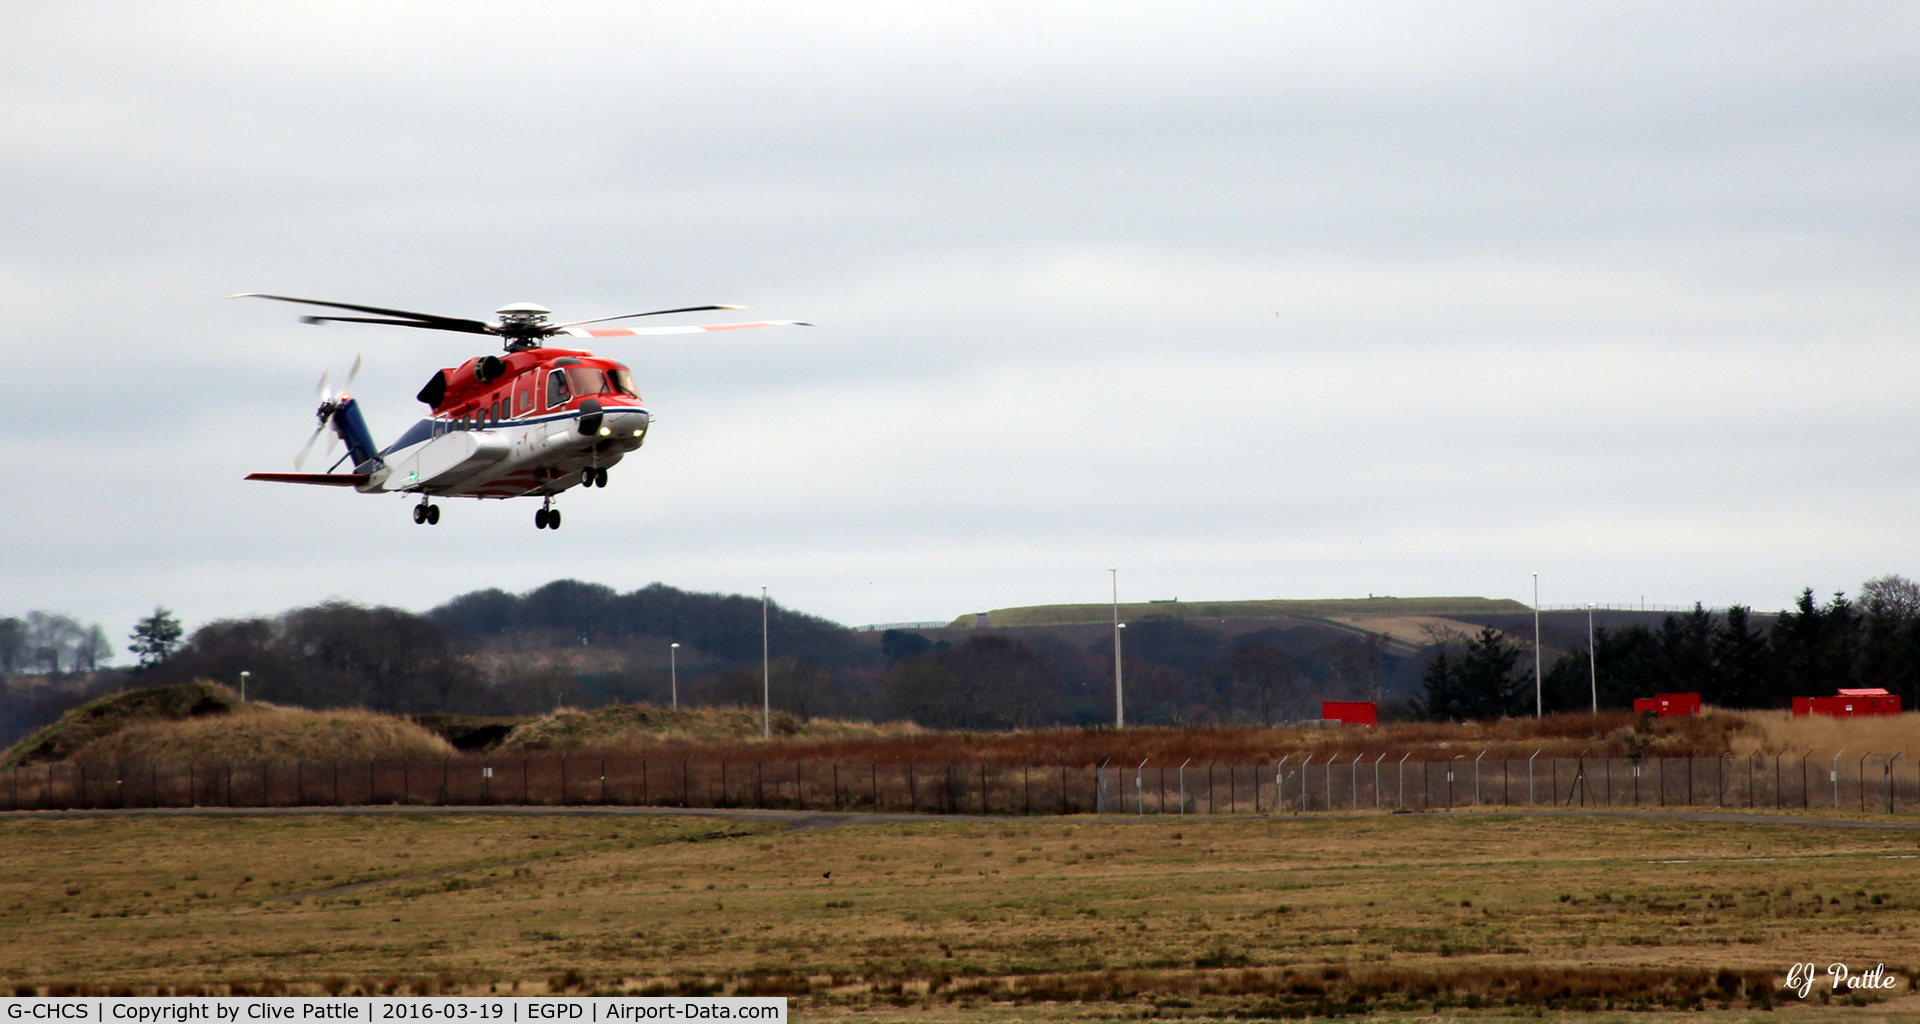 G-CHCS, 2010 Sikorsky S-92A C/N 920125, Long approach to land at Aberdeen EGPD